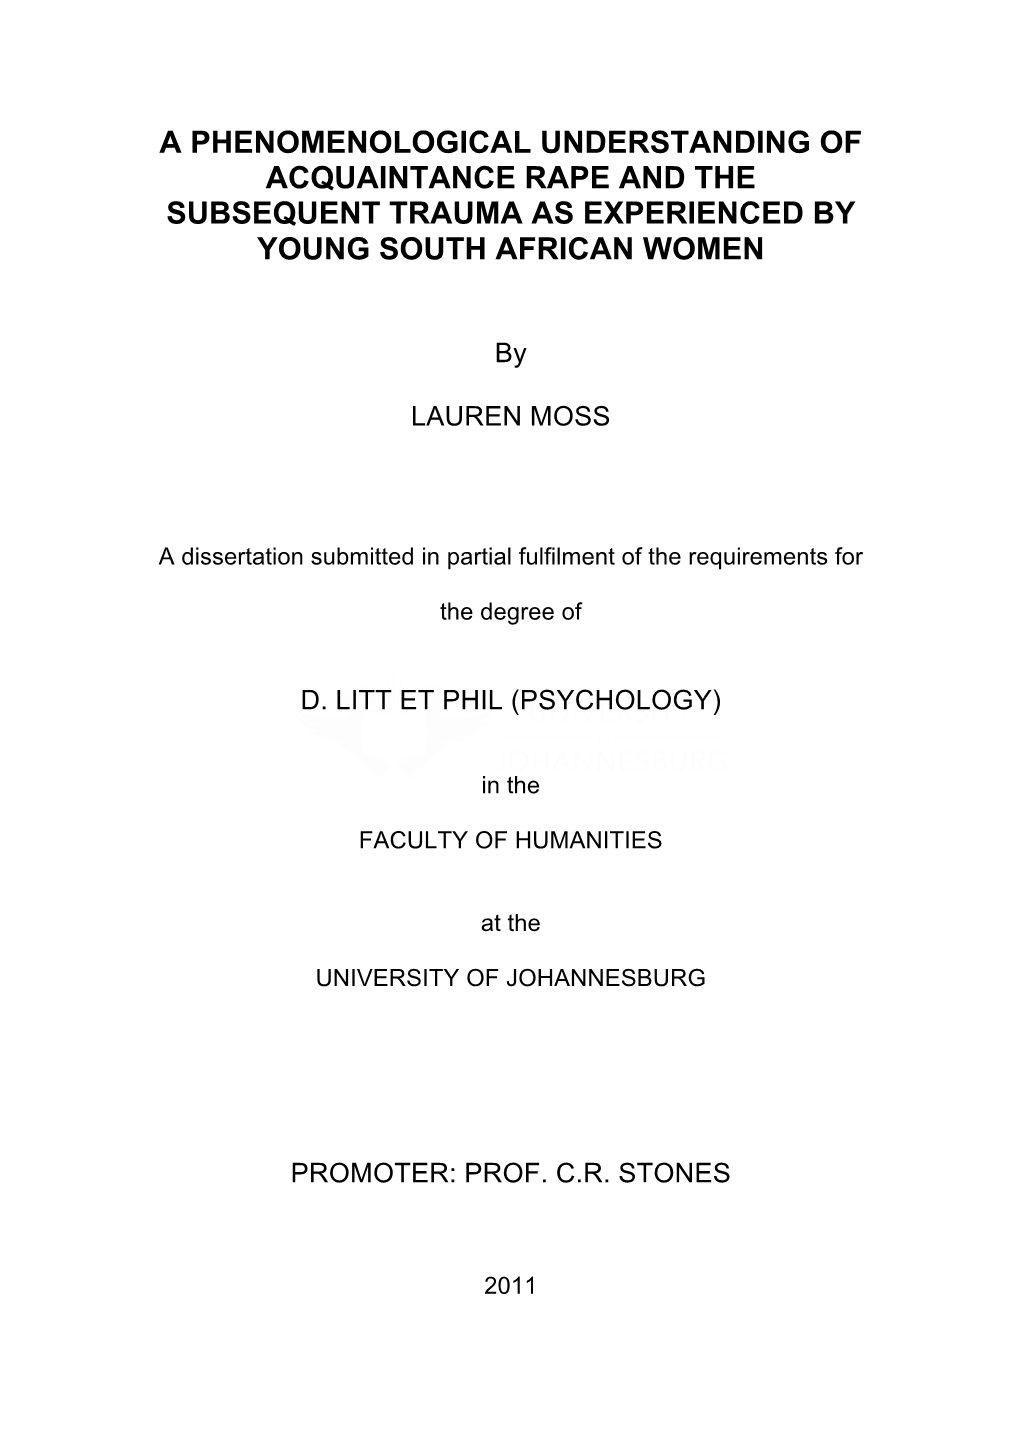 A Phenomenological Understanding of Acquaintance Rape and the Subsequent Trauma As Experienced by Young South African Women